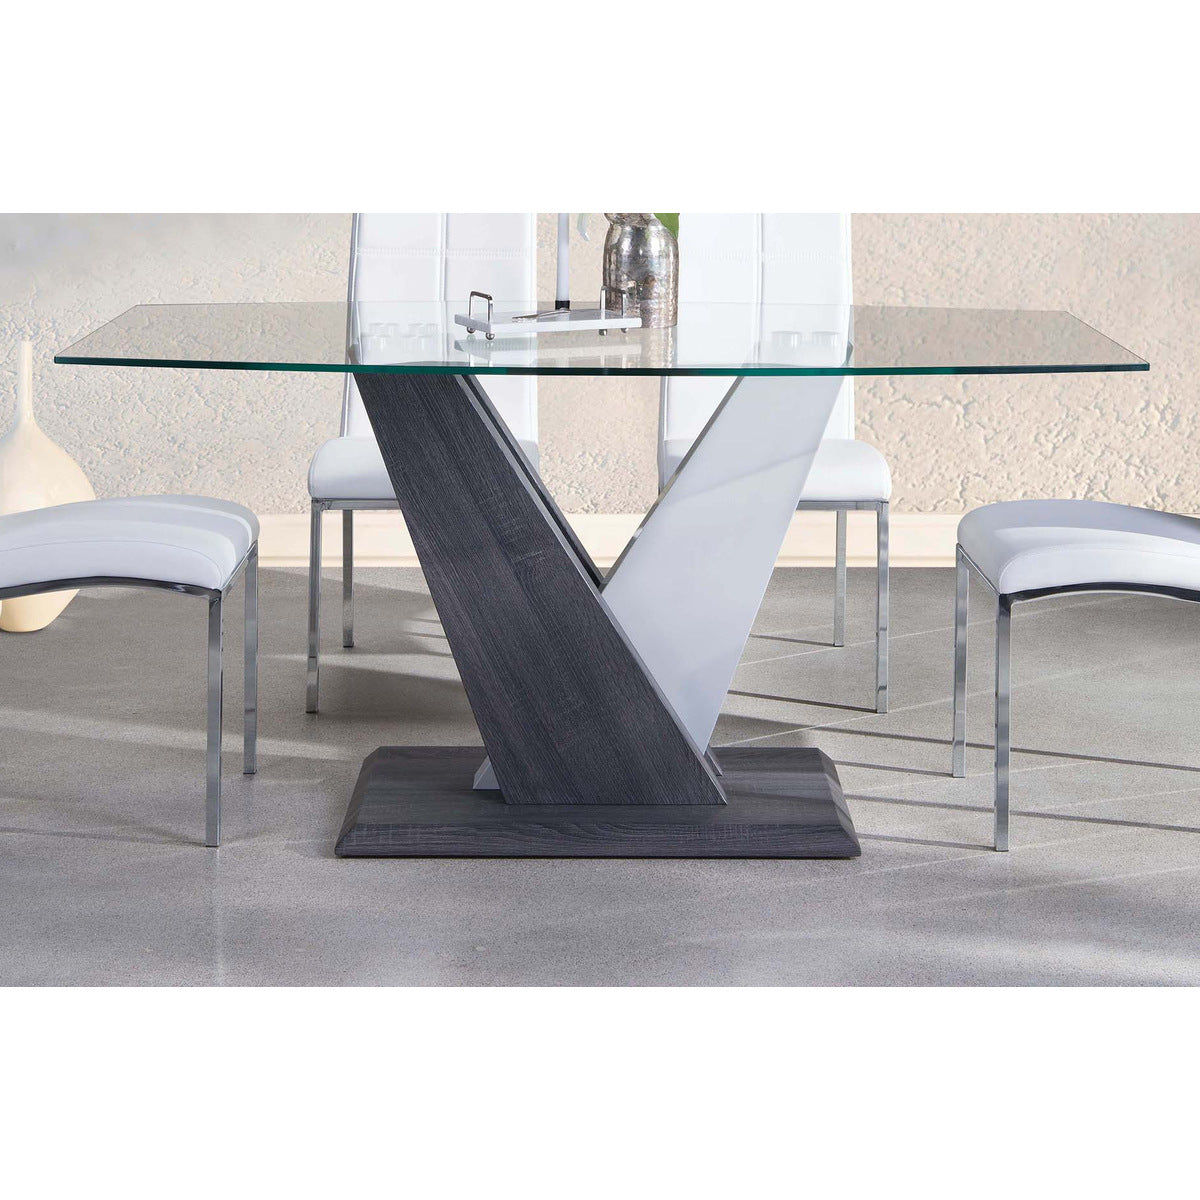 Baxter Dining Collection White 7383-63/738S3